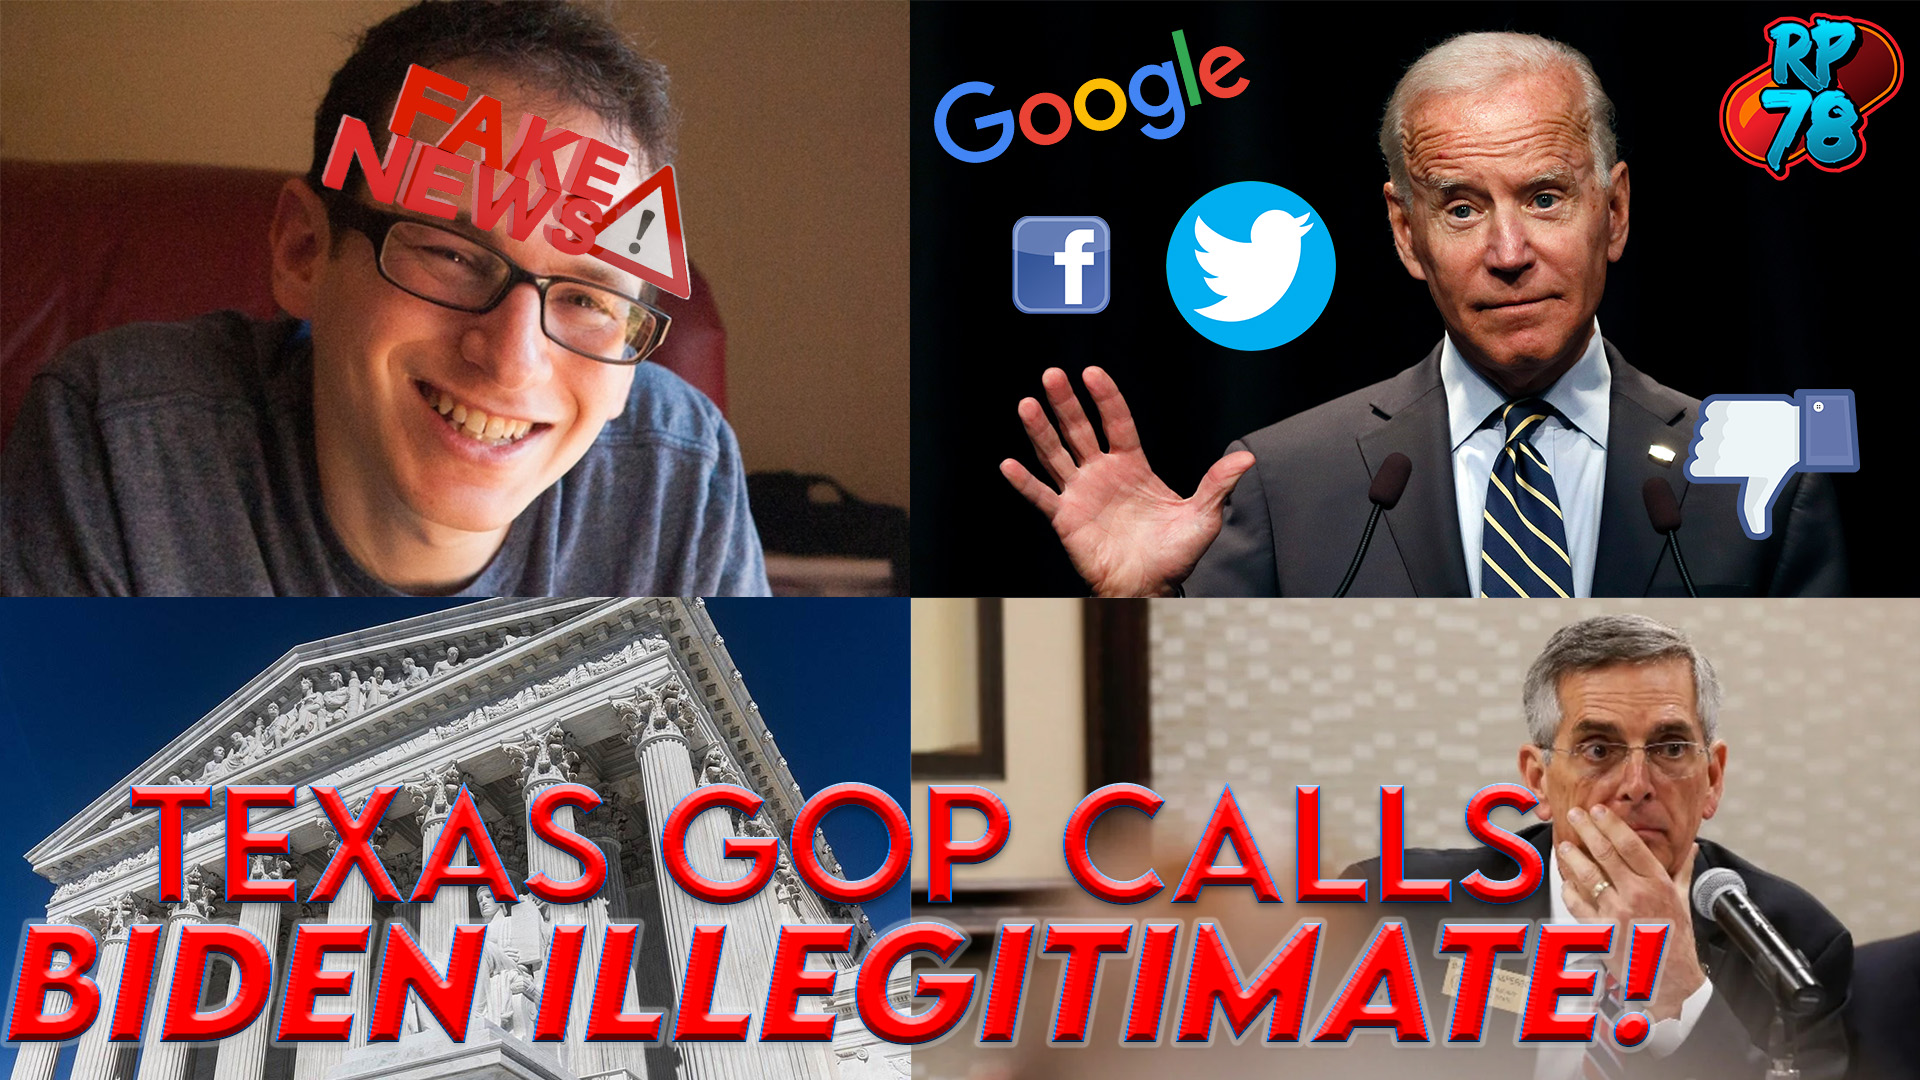 Texas GOP Labels Biden Illegitimate While Dems Hold Disinformation Hearings